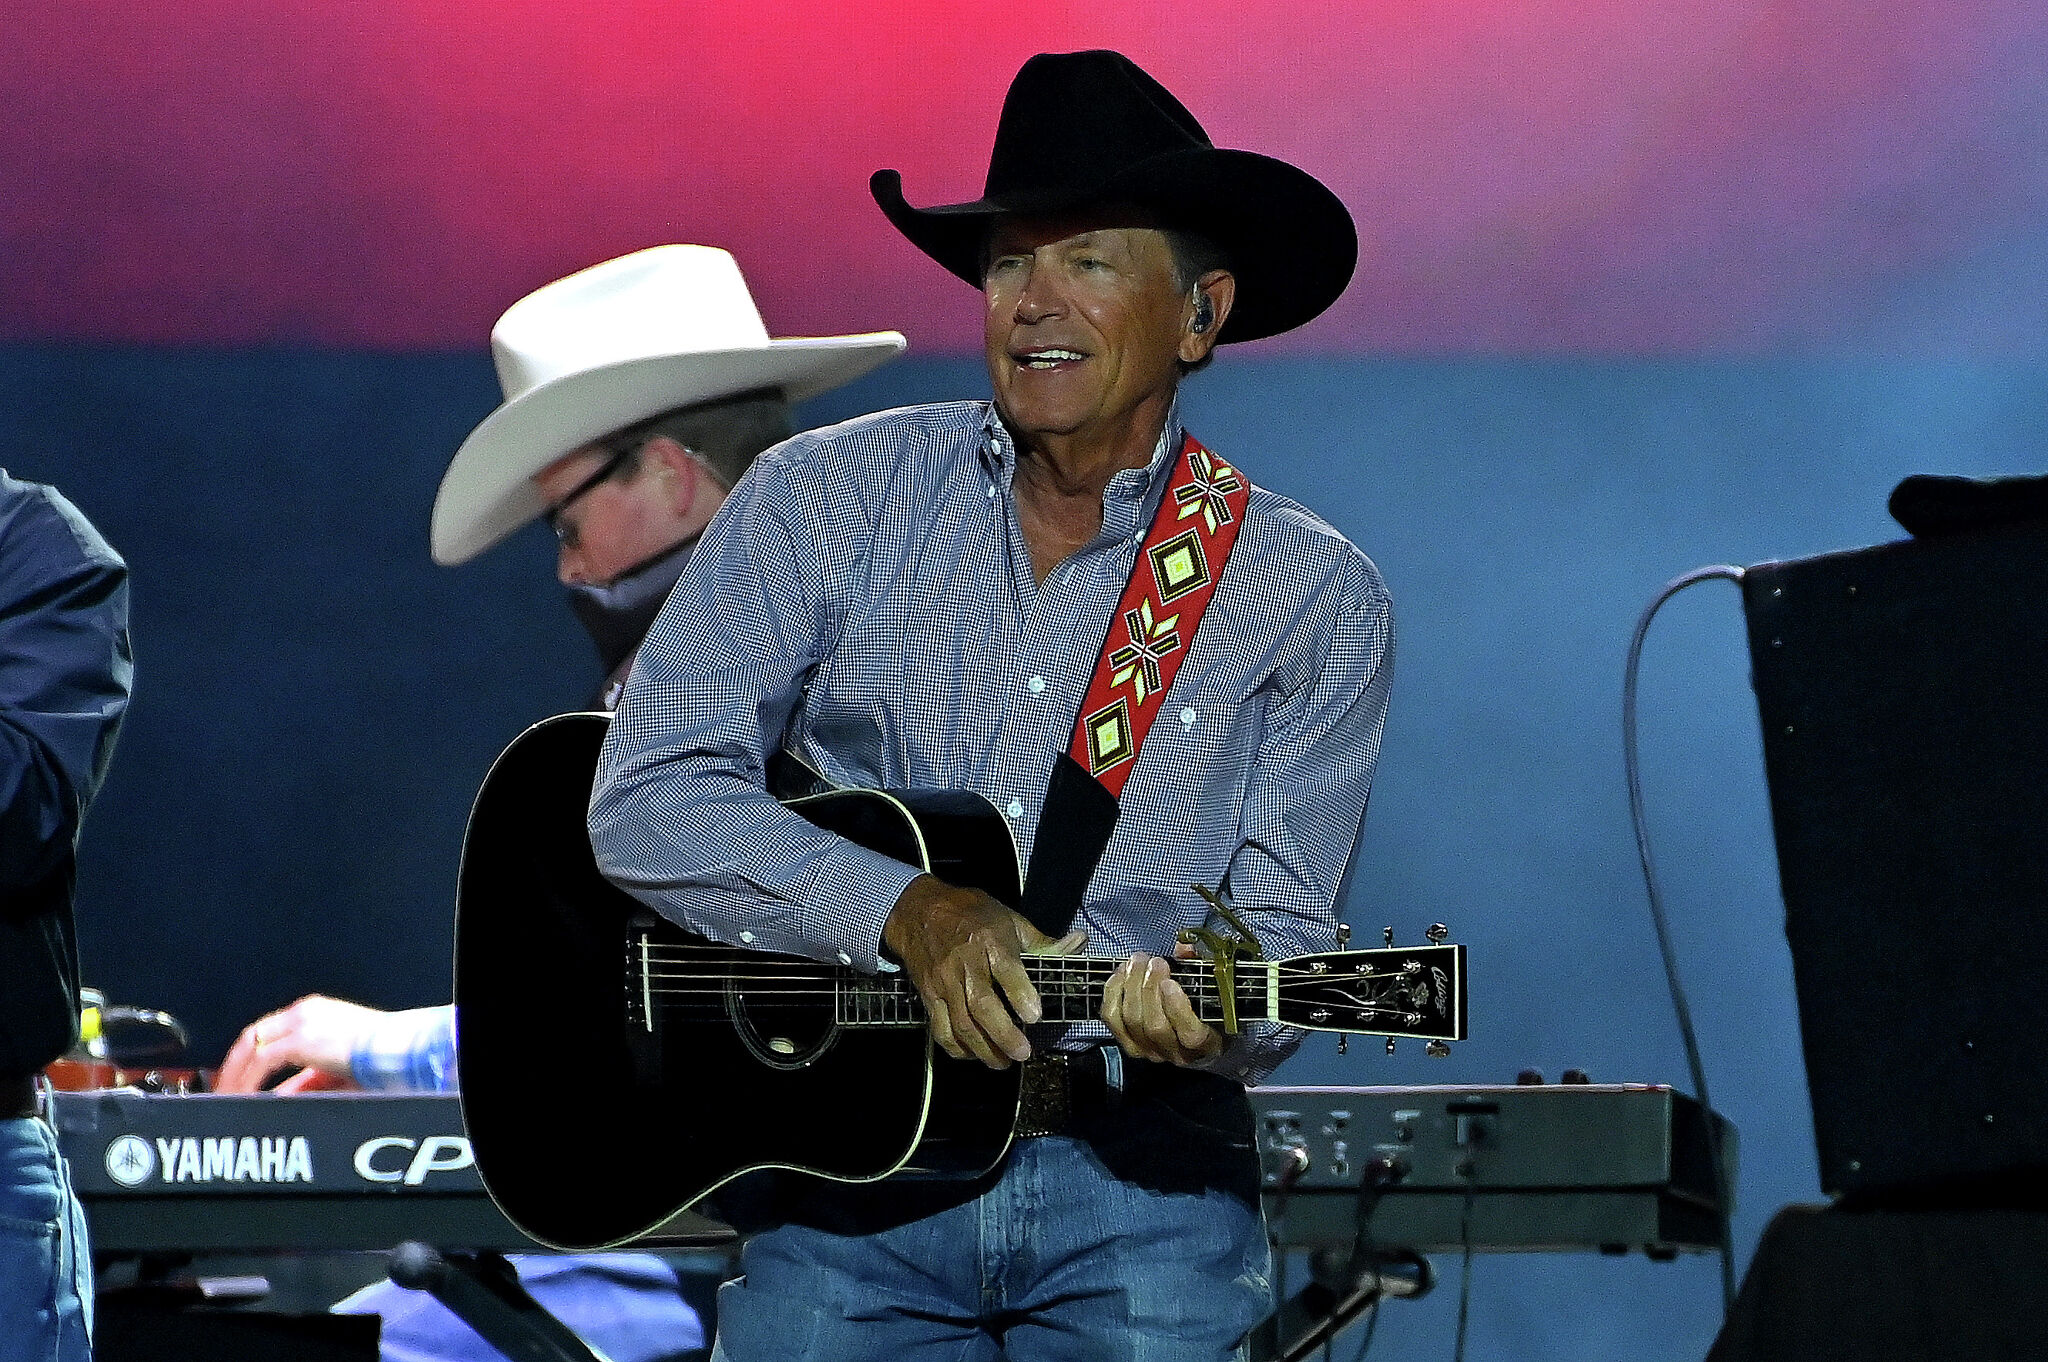 Strait could play concert at Texas A&M's Kyle Field